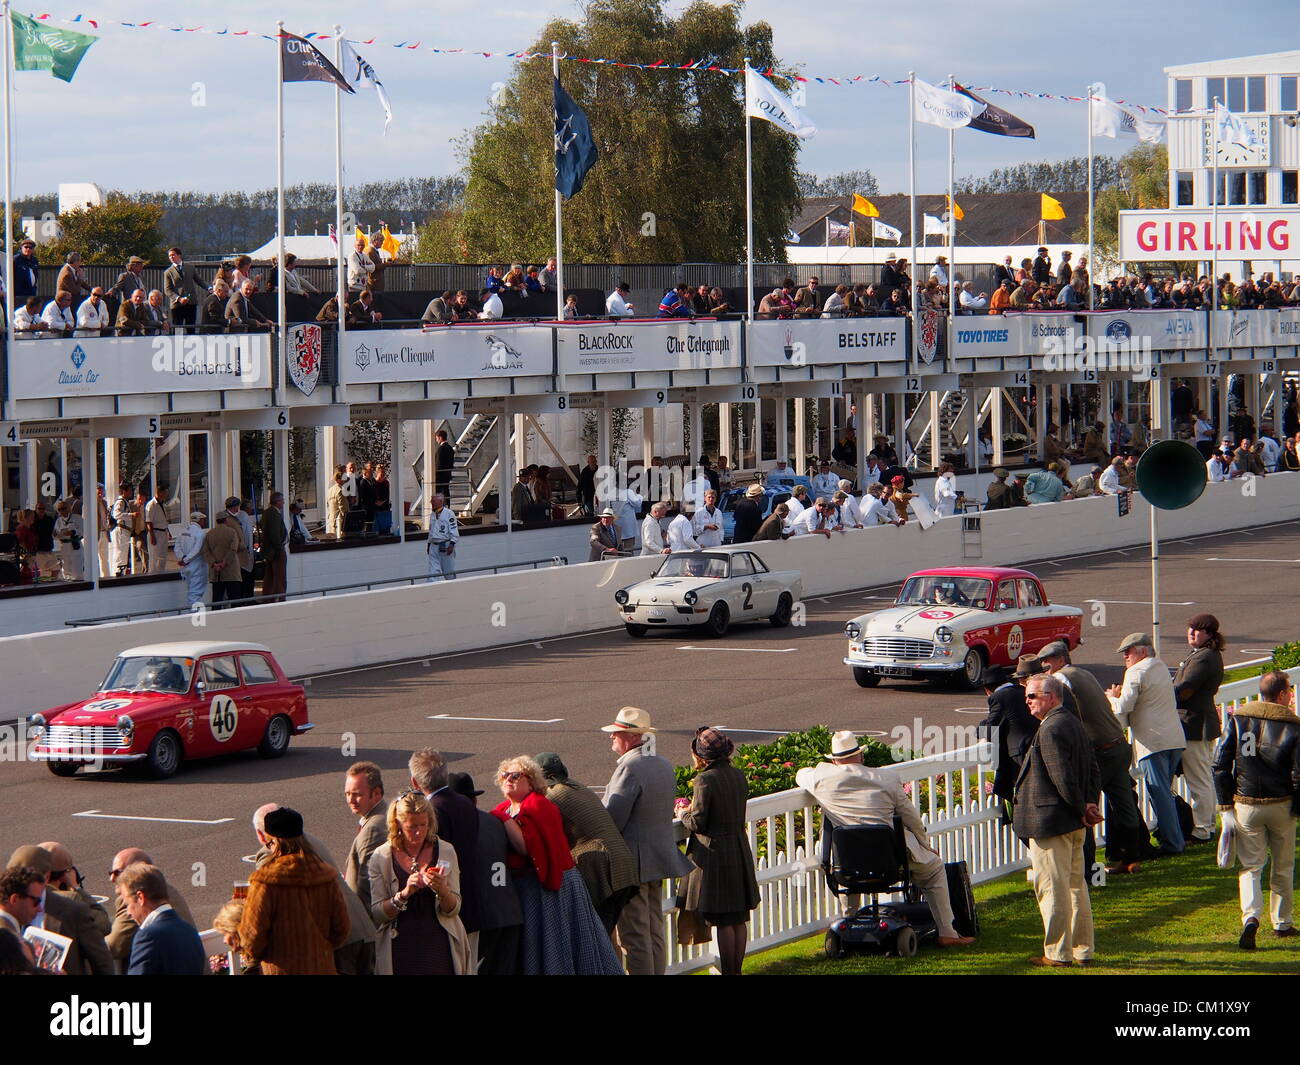 Goodwood Revival Practice Day Friday September 14th.2012. Three historic saloon racing cars approach the finishing line in front engineers and spectators in the pits. Stock Photo